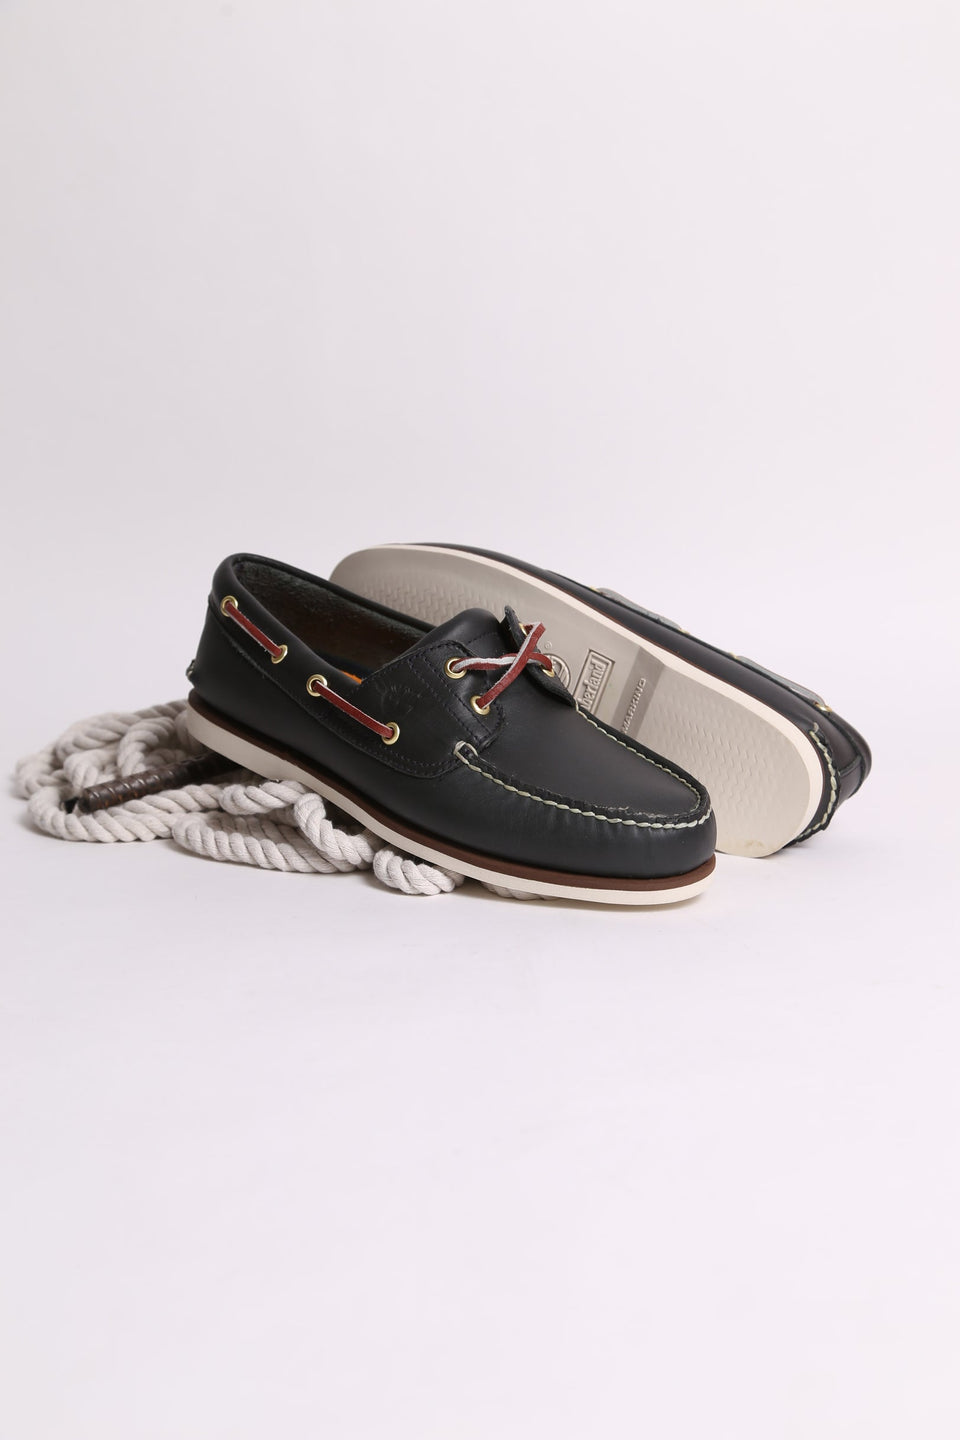 Timberland Classic Boat - Navy Blue